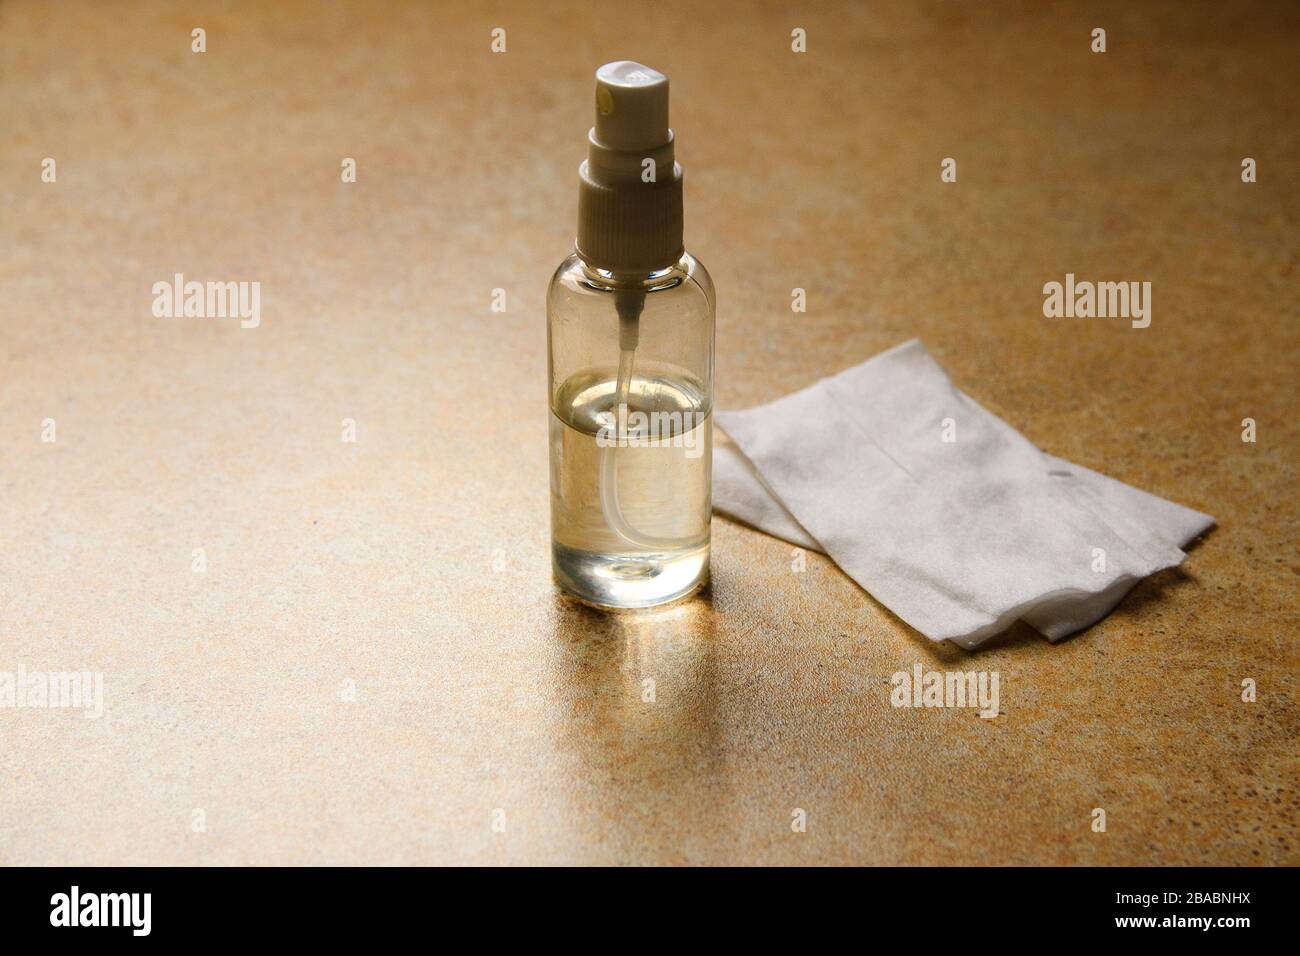 hand spray antiseptic for disinfection of hands from viruses and bacteria Stock Photo